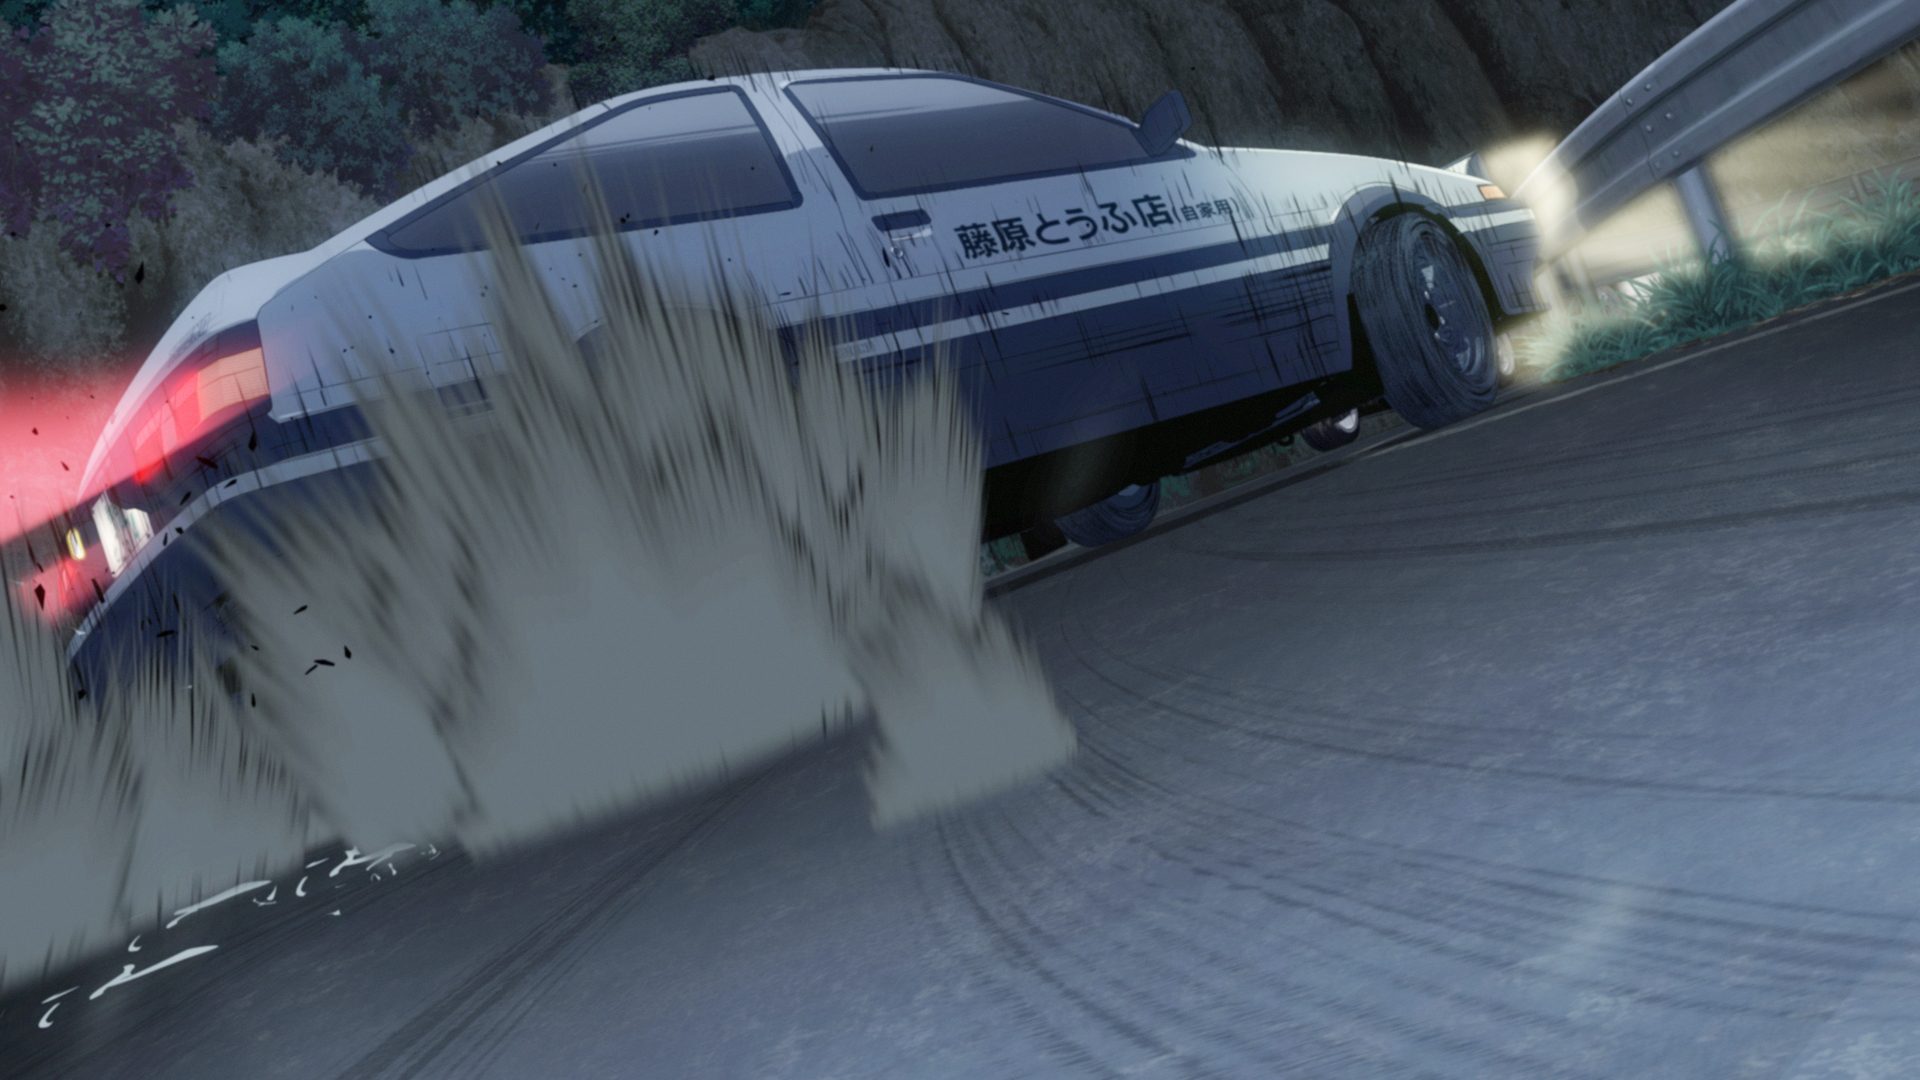 [Movie Review] "New Initial D The Movie Legend 2 Racer" makes old